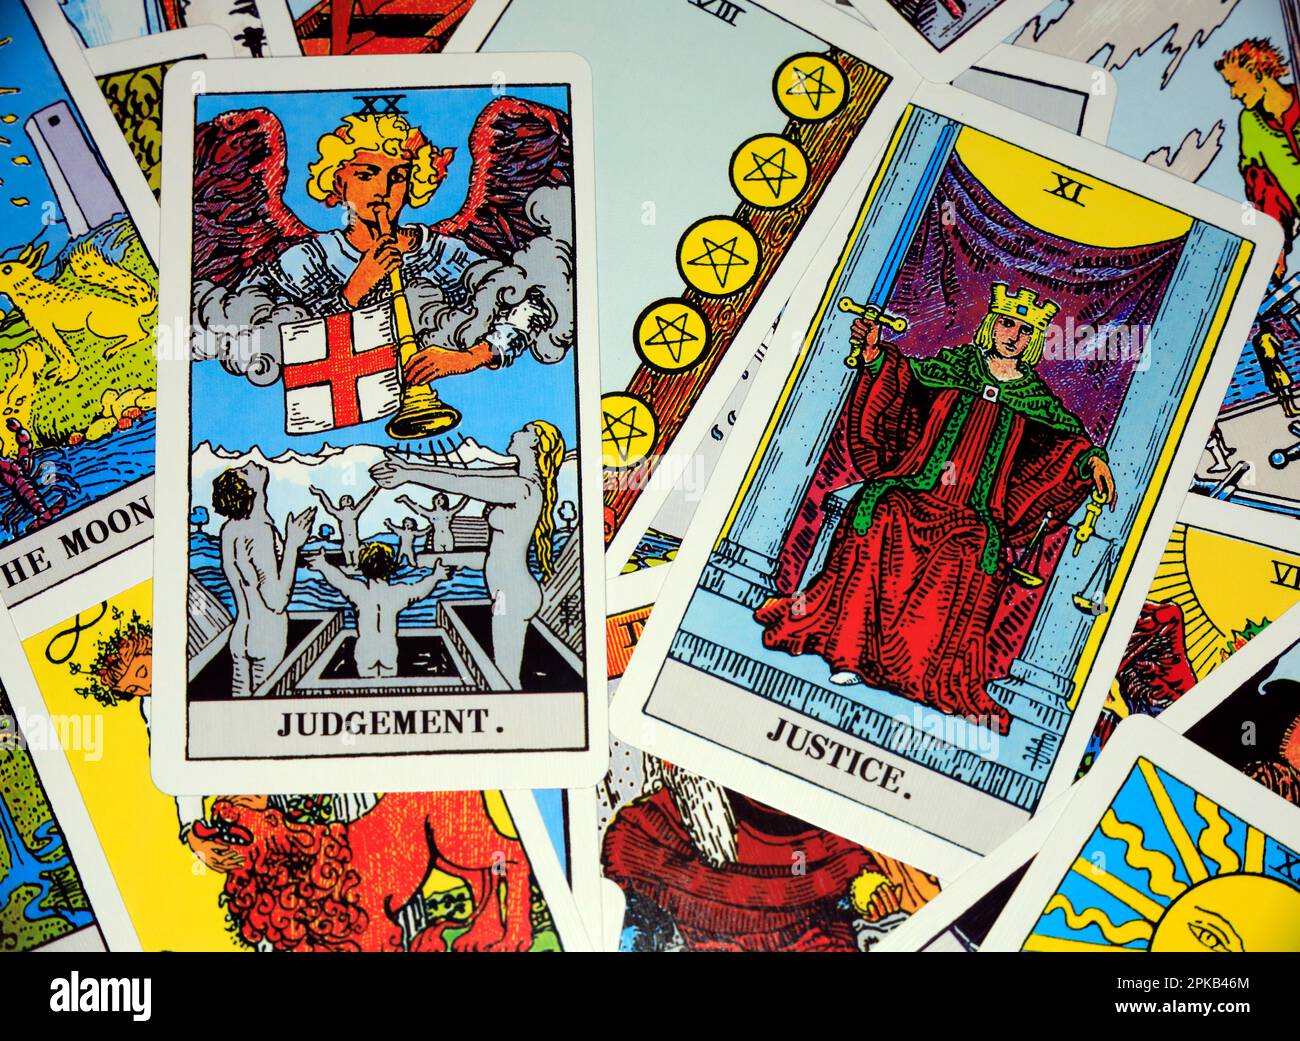 Tarot cards-scattered arrangement. Judgement and Justice cards prominent Stock Photo